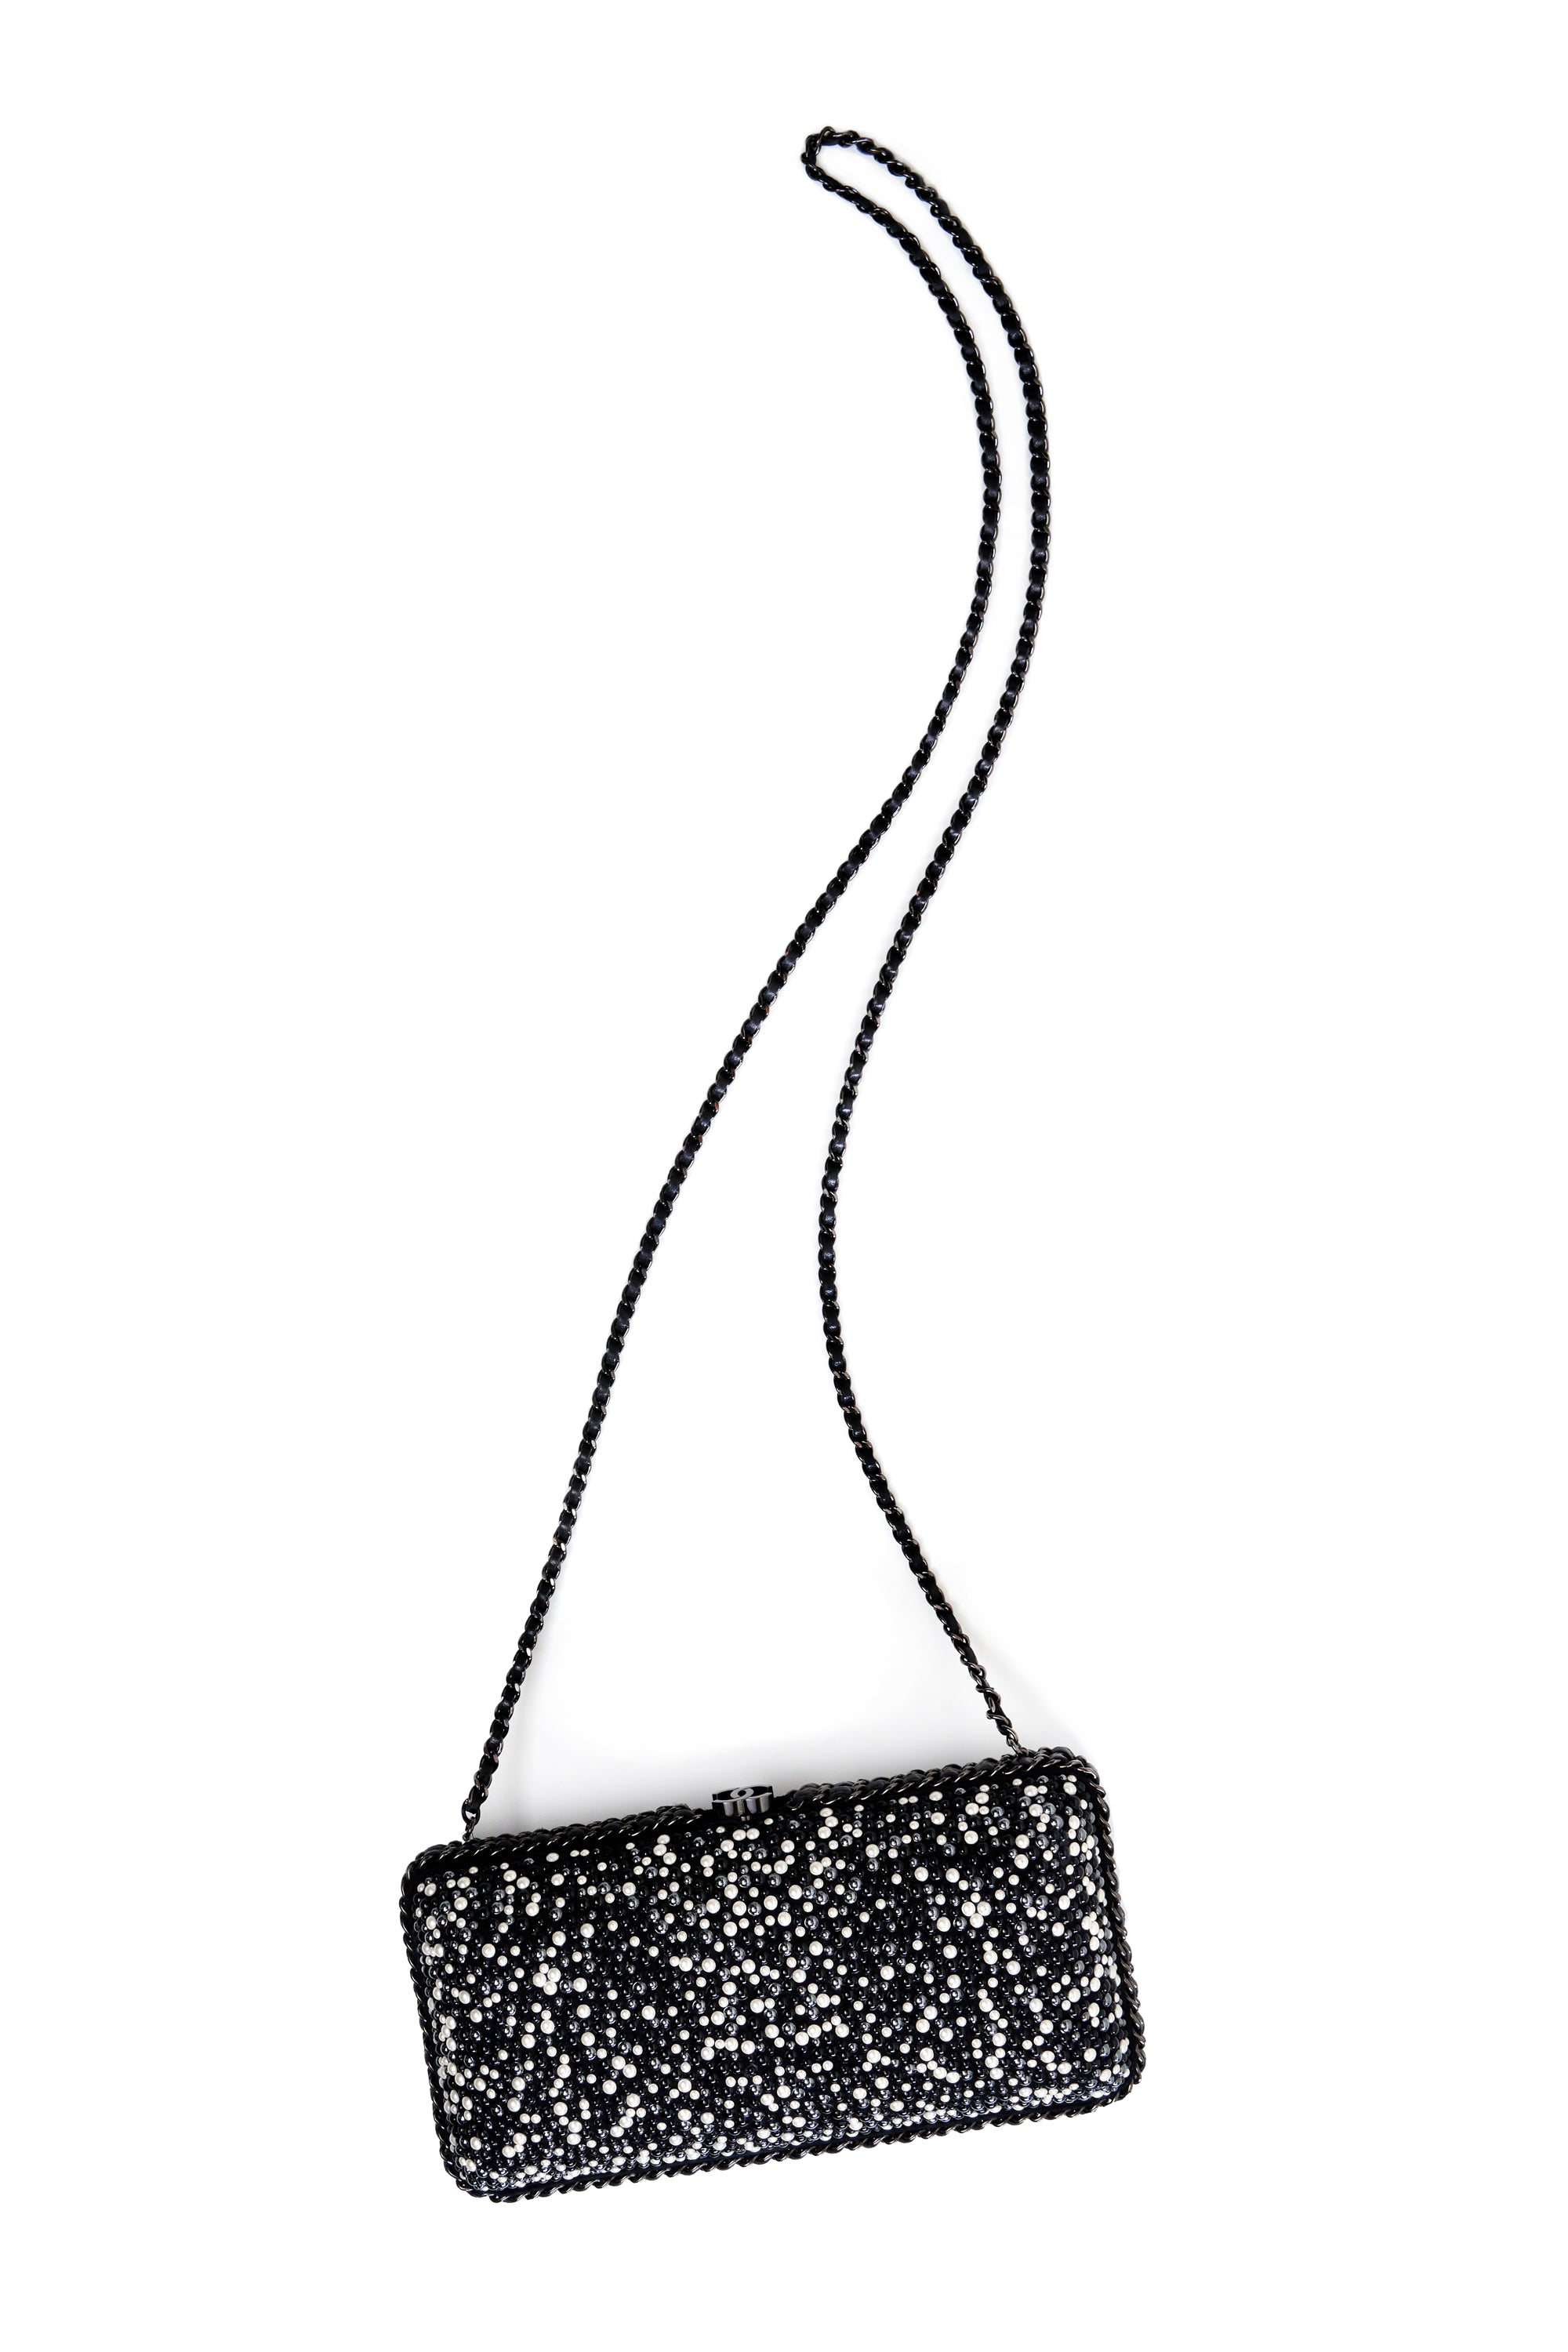 Chanel Black and White Pearl Encrusted Clutch With Black Chain 2014-15